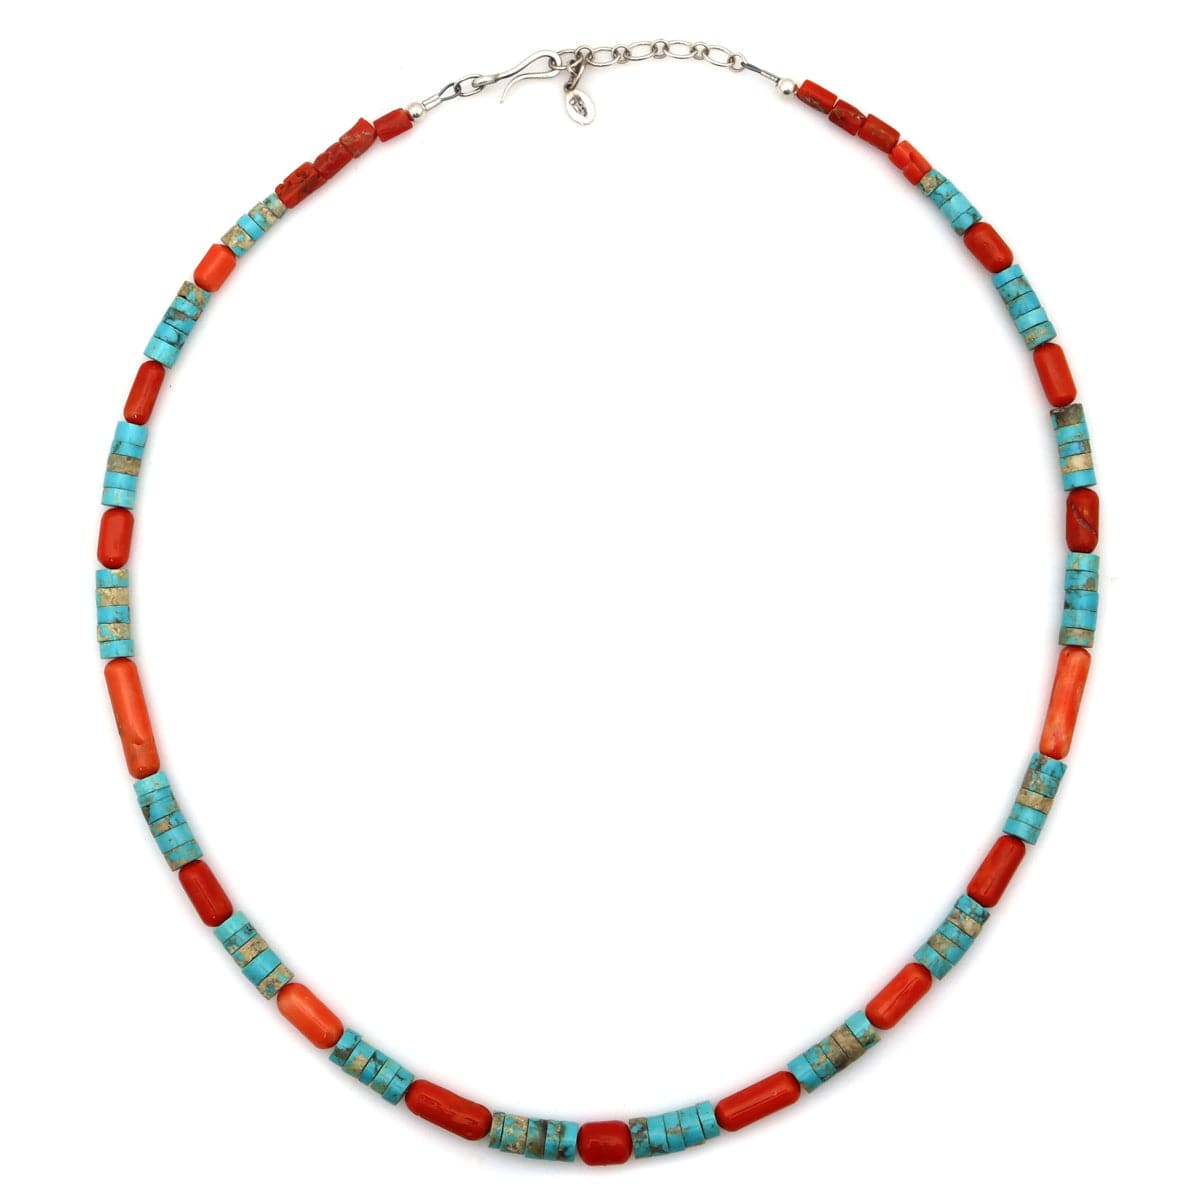 Coral, Turquoise, and Sterling Silver Heishi-Style Necklace, Strung by Frank Patania, Jr., 23" length (J91620A-0221-022)